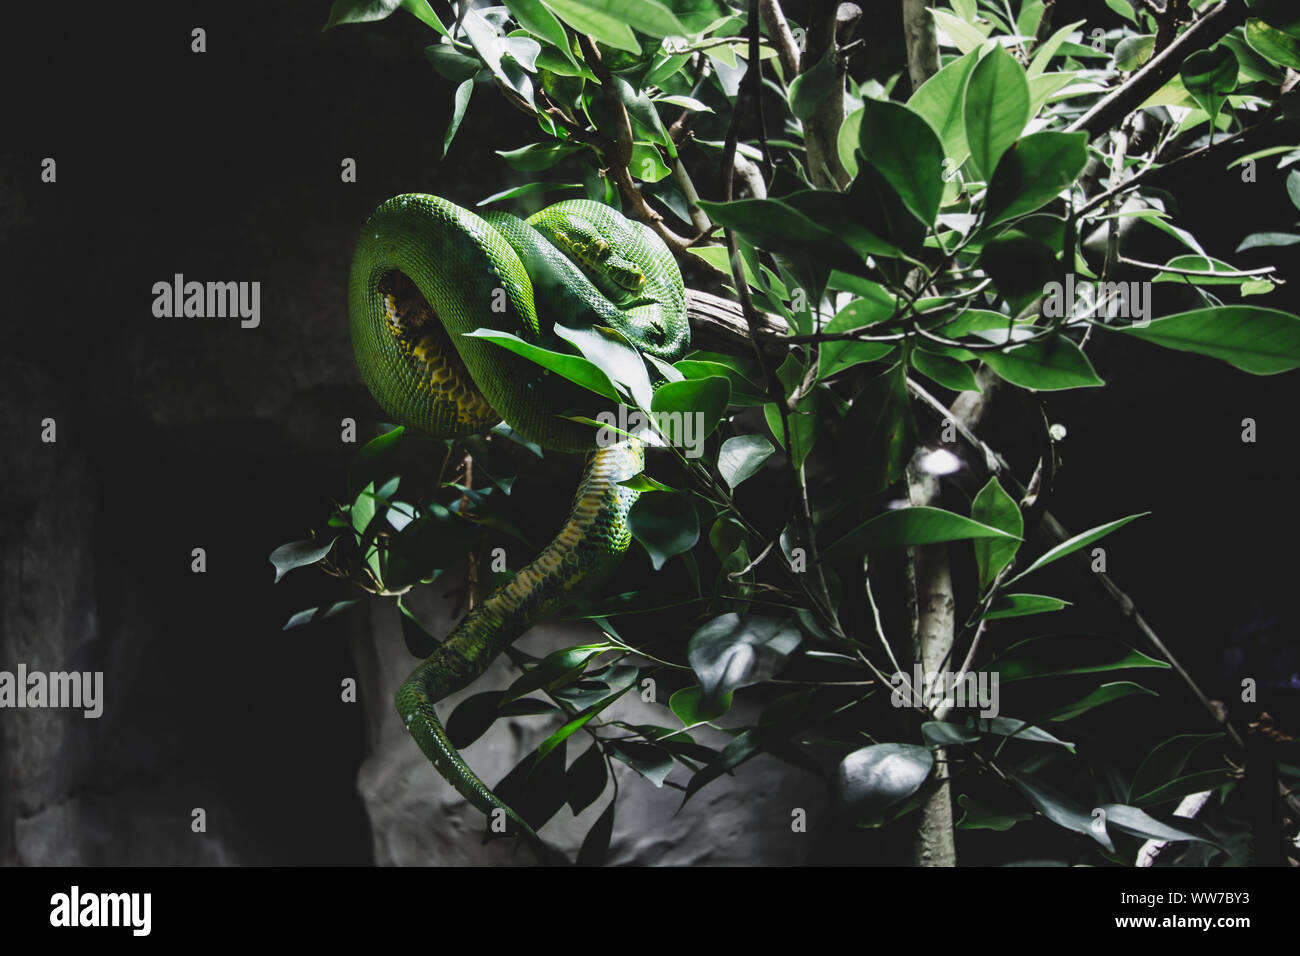 A close-up view of a green tree python slithering on a tree. Stock Photo